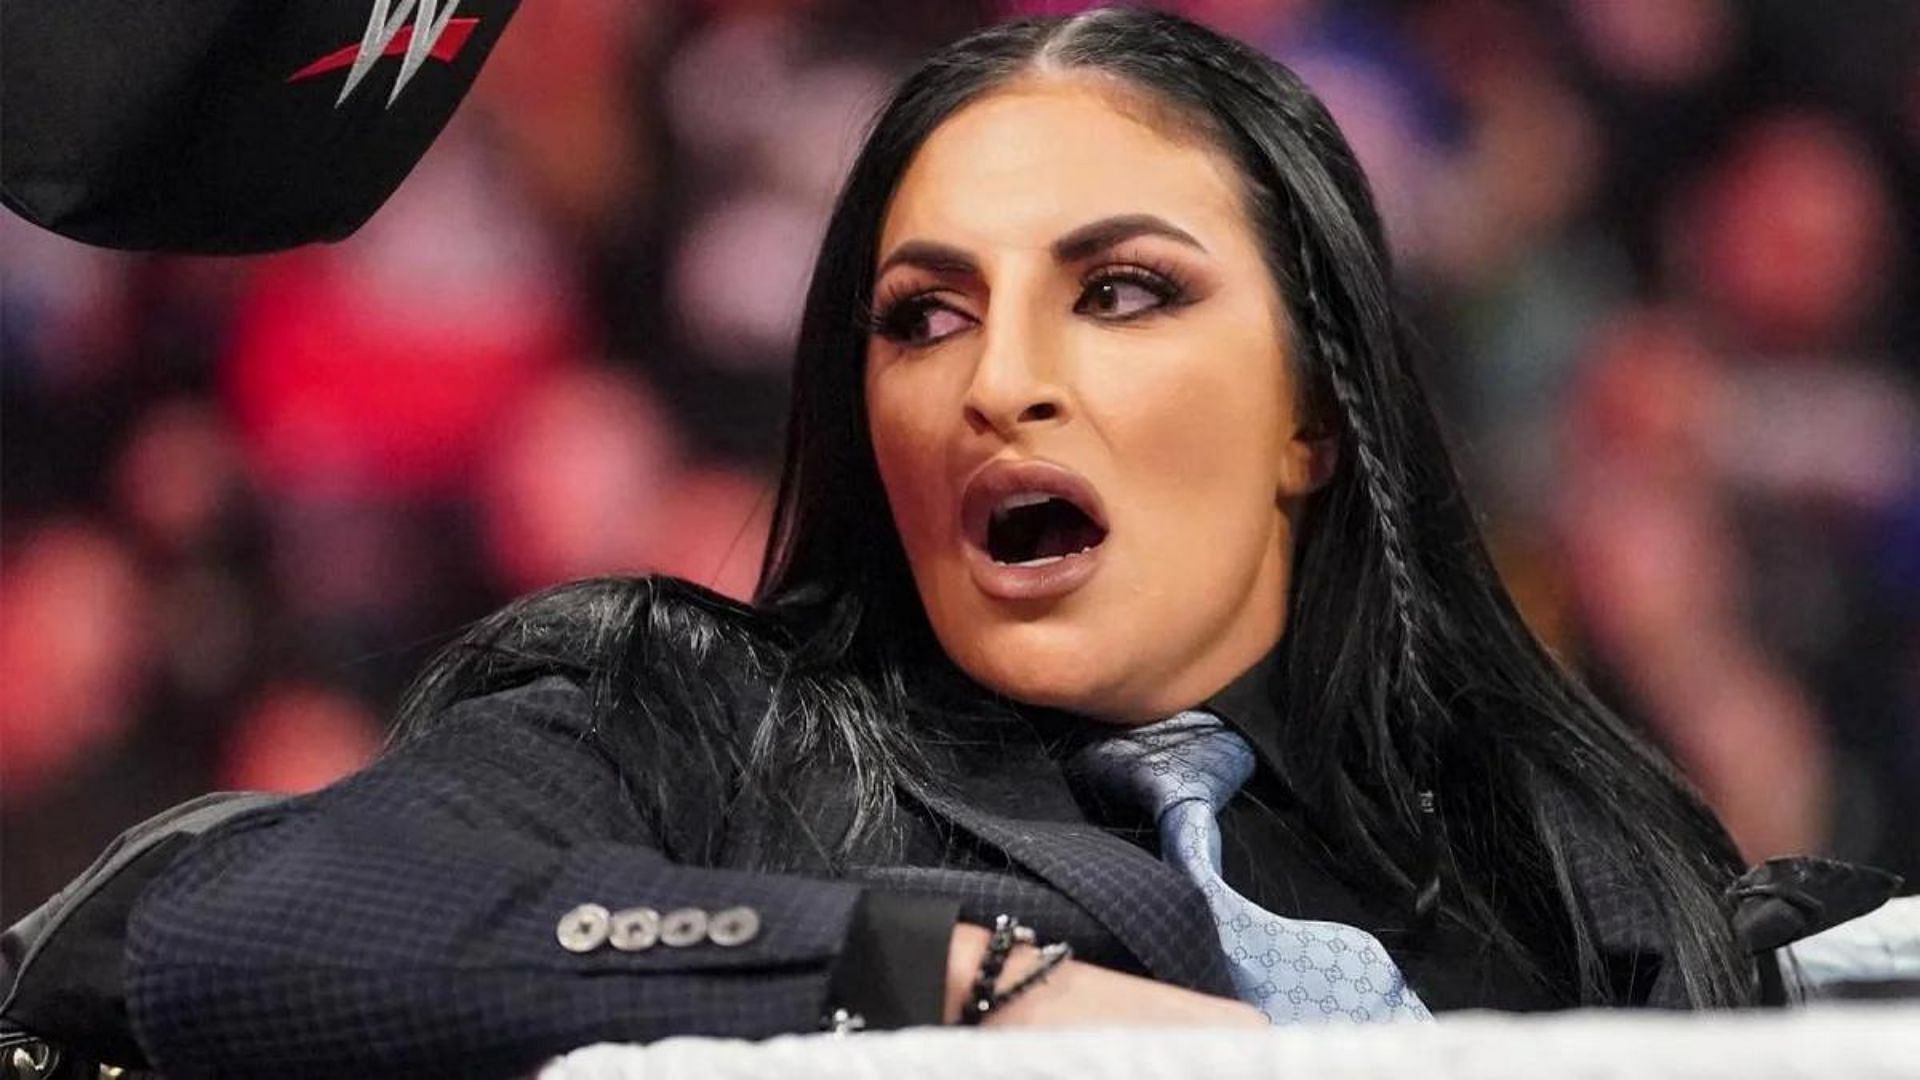 Sonya Deville was recently arrested in New Jersey